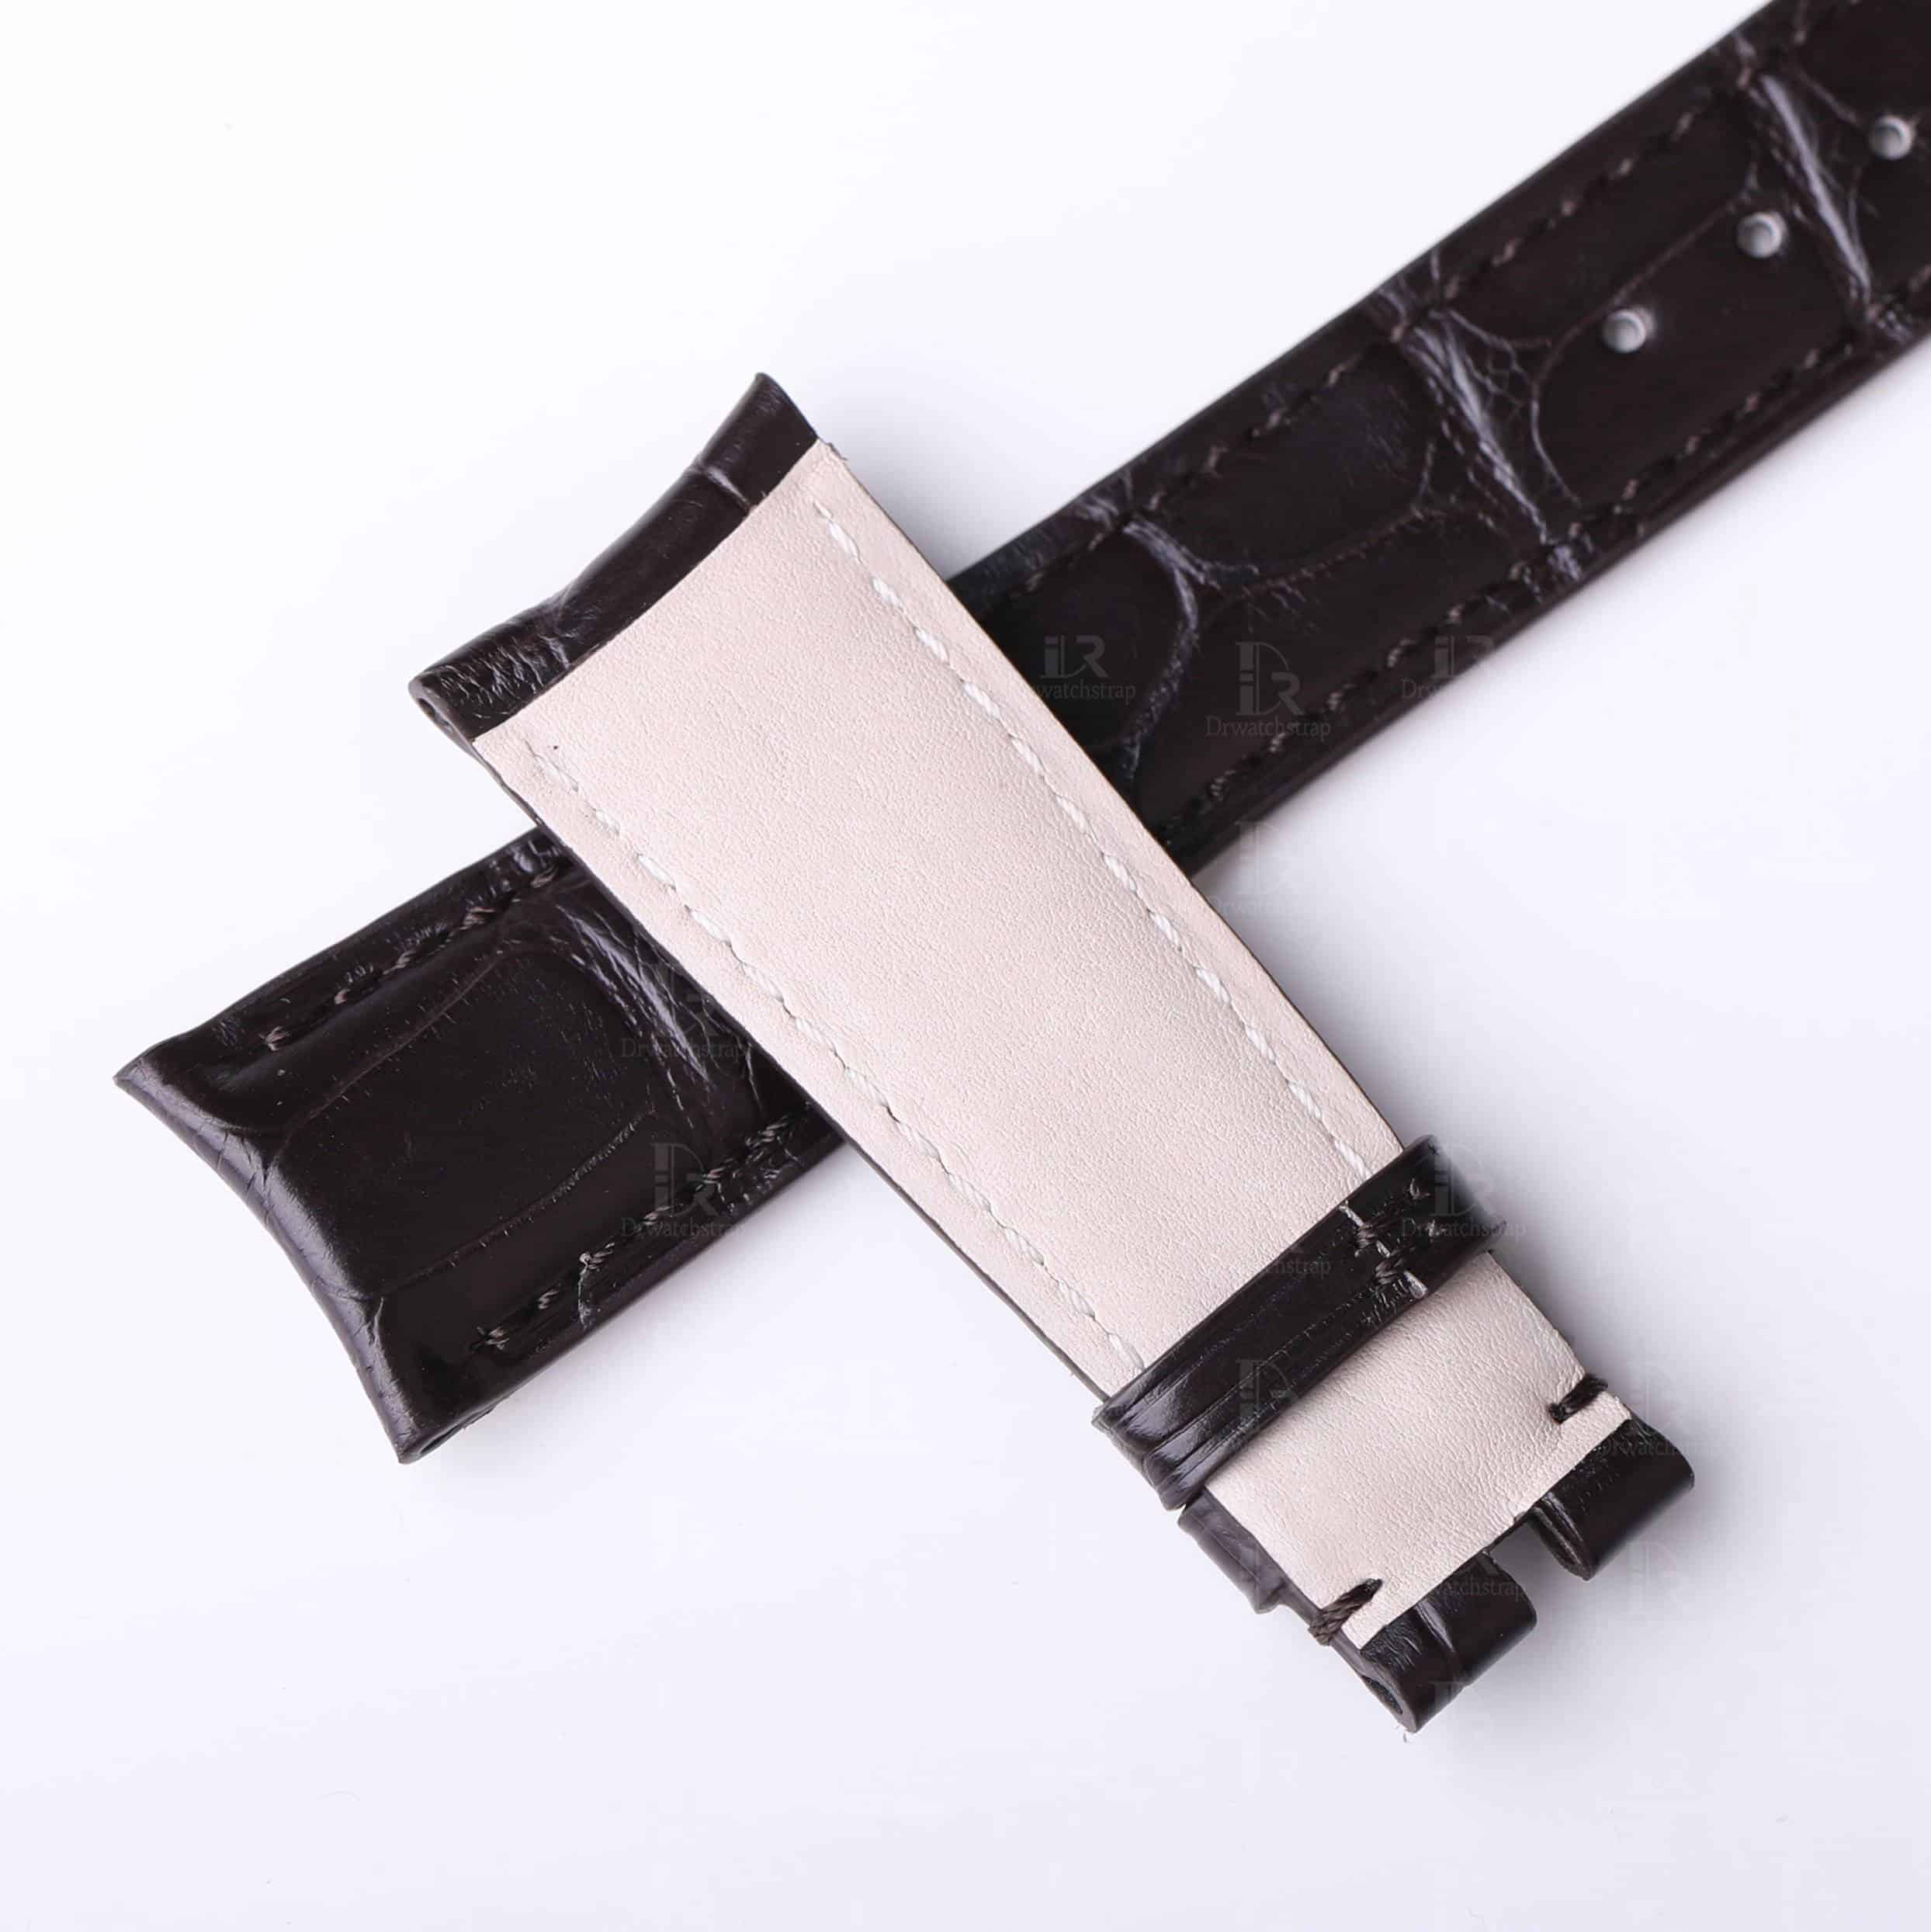 Custom High-end best quality Belly-scale alligator crocodile black curved end leather watch band and watch strap replacement for Rolex Cellini Moonphase 20mm watches - Shop Rolex leather watch straps online at a low price